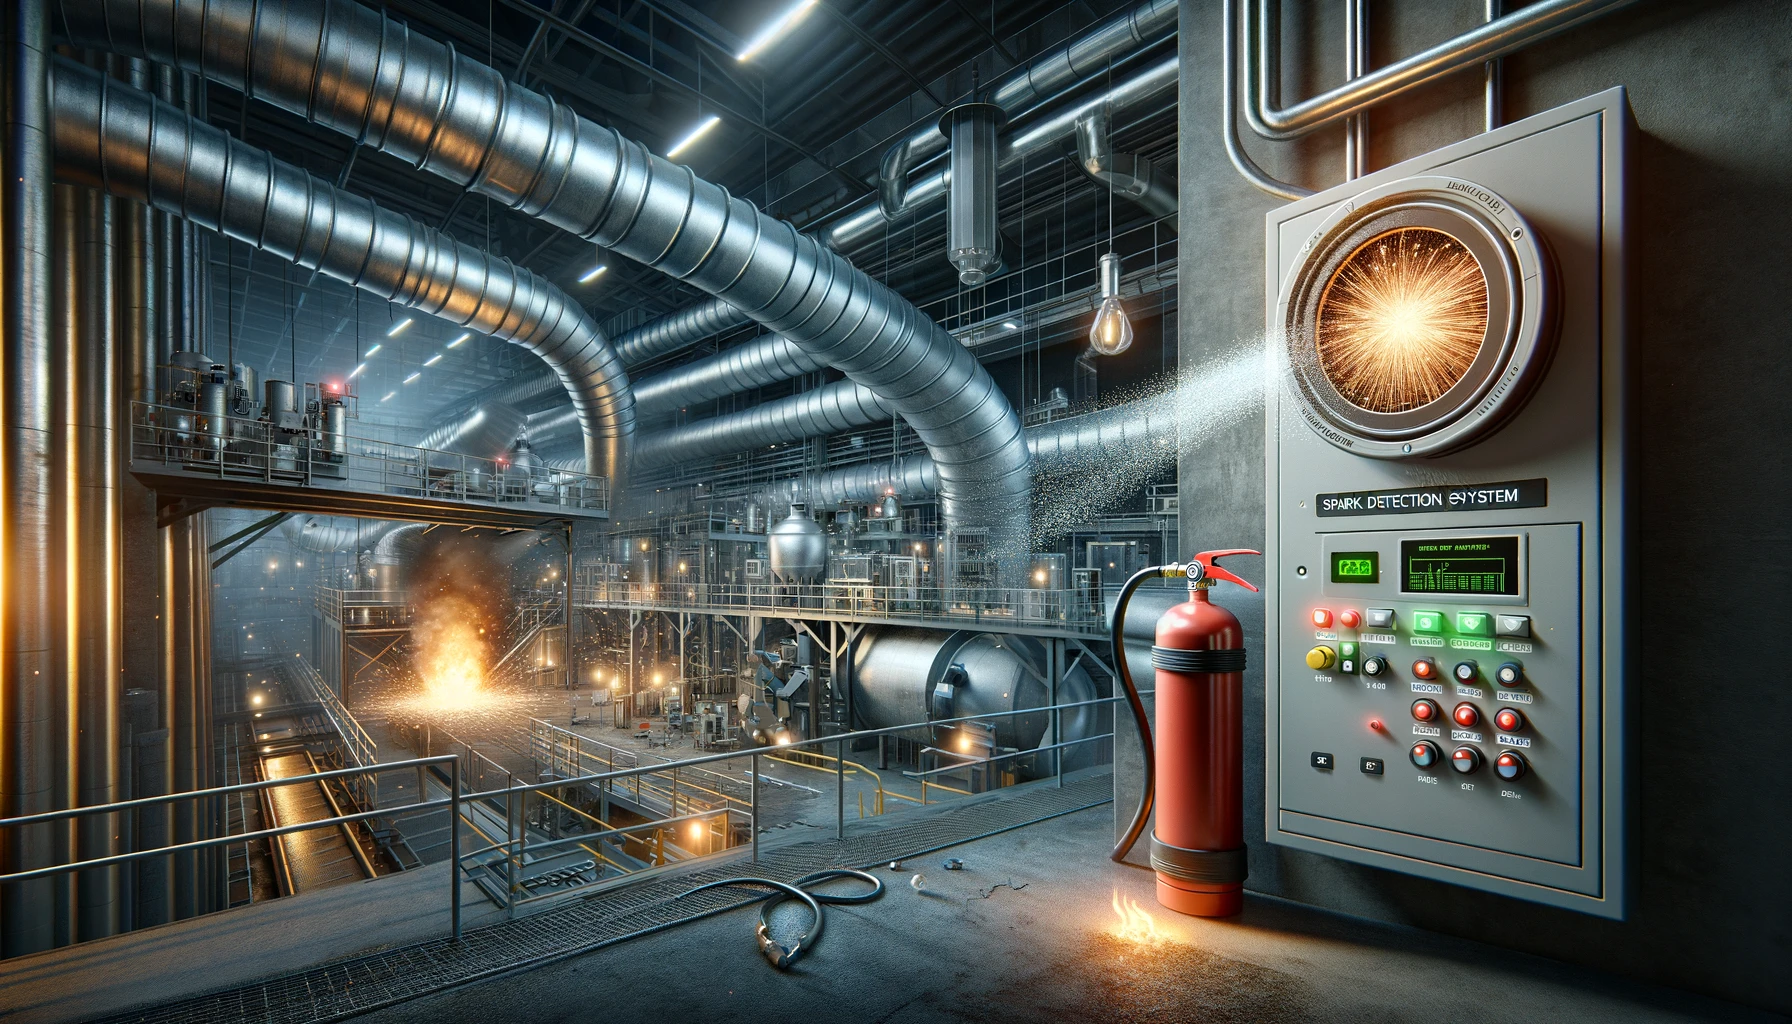 Featured image for “The essentials of Spark Detection systems in preventing industrial fires”